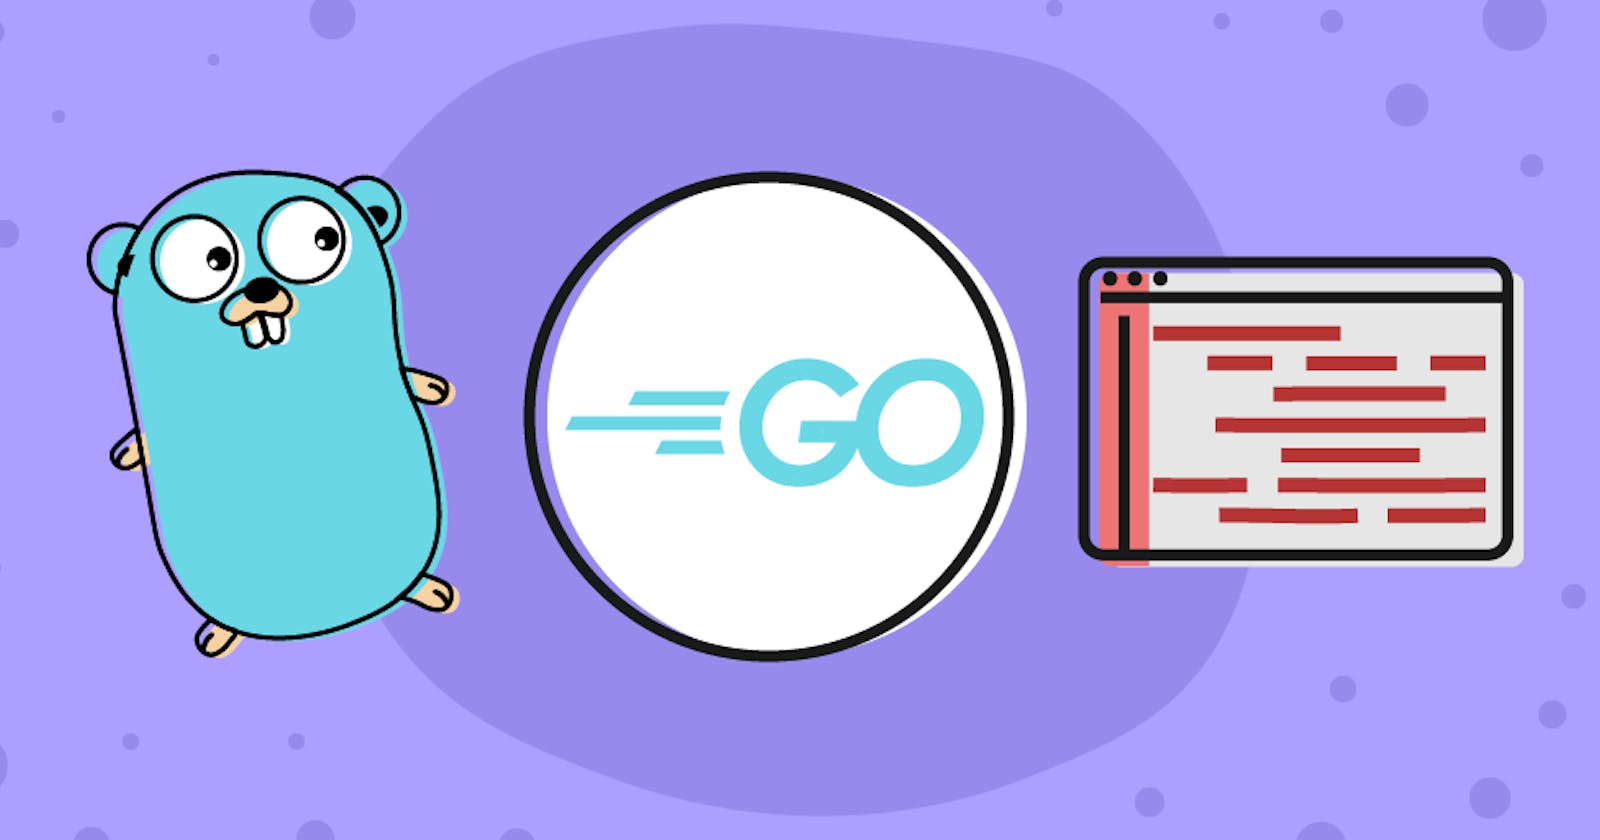 Golang : a valid competitor for the crown of error handling